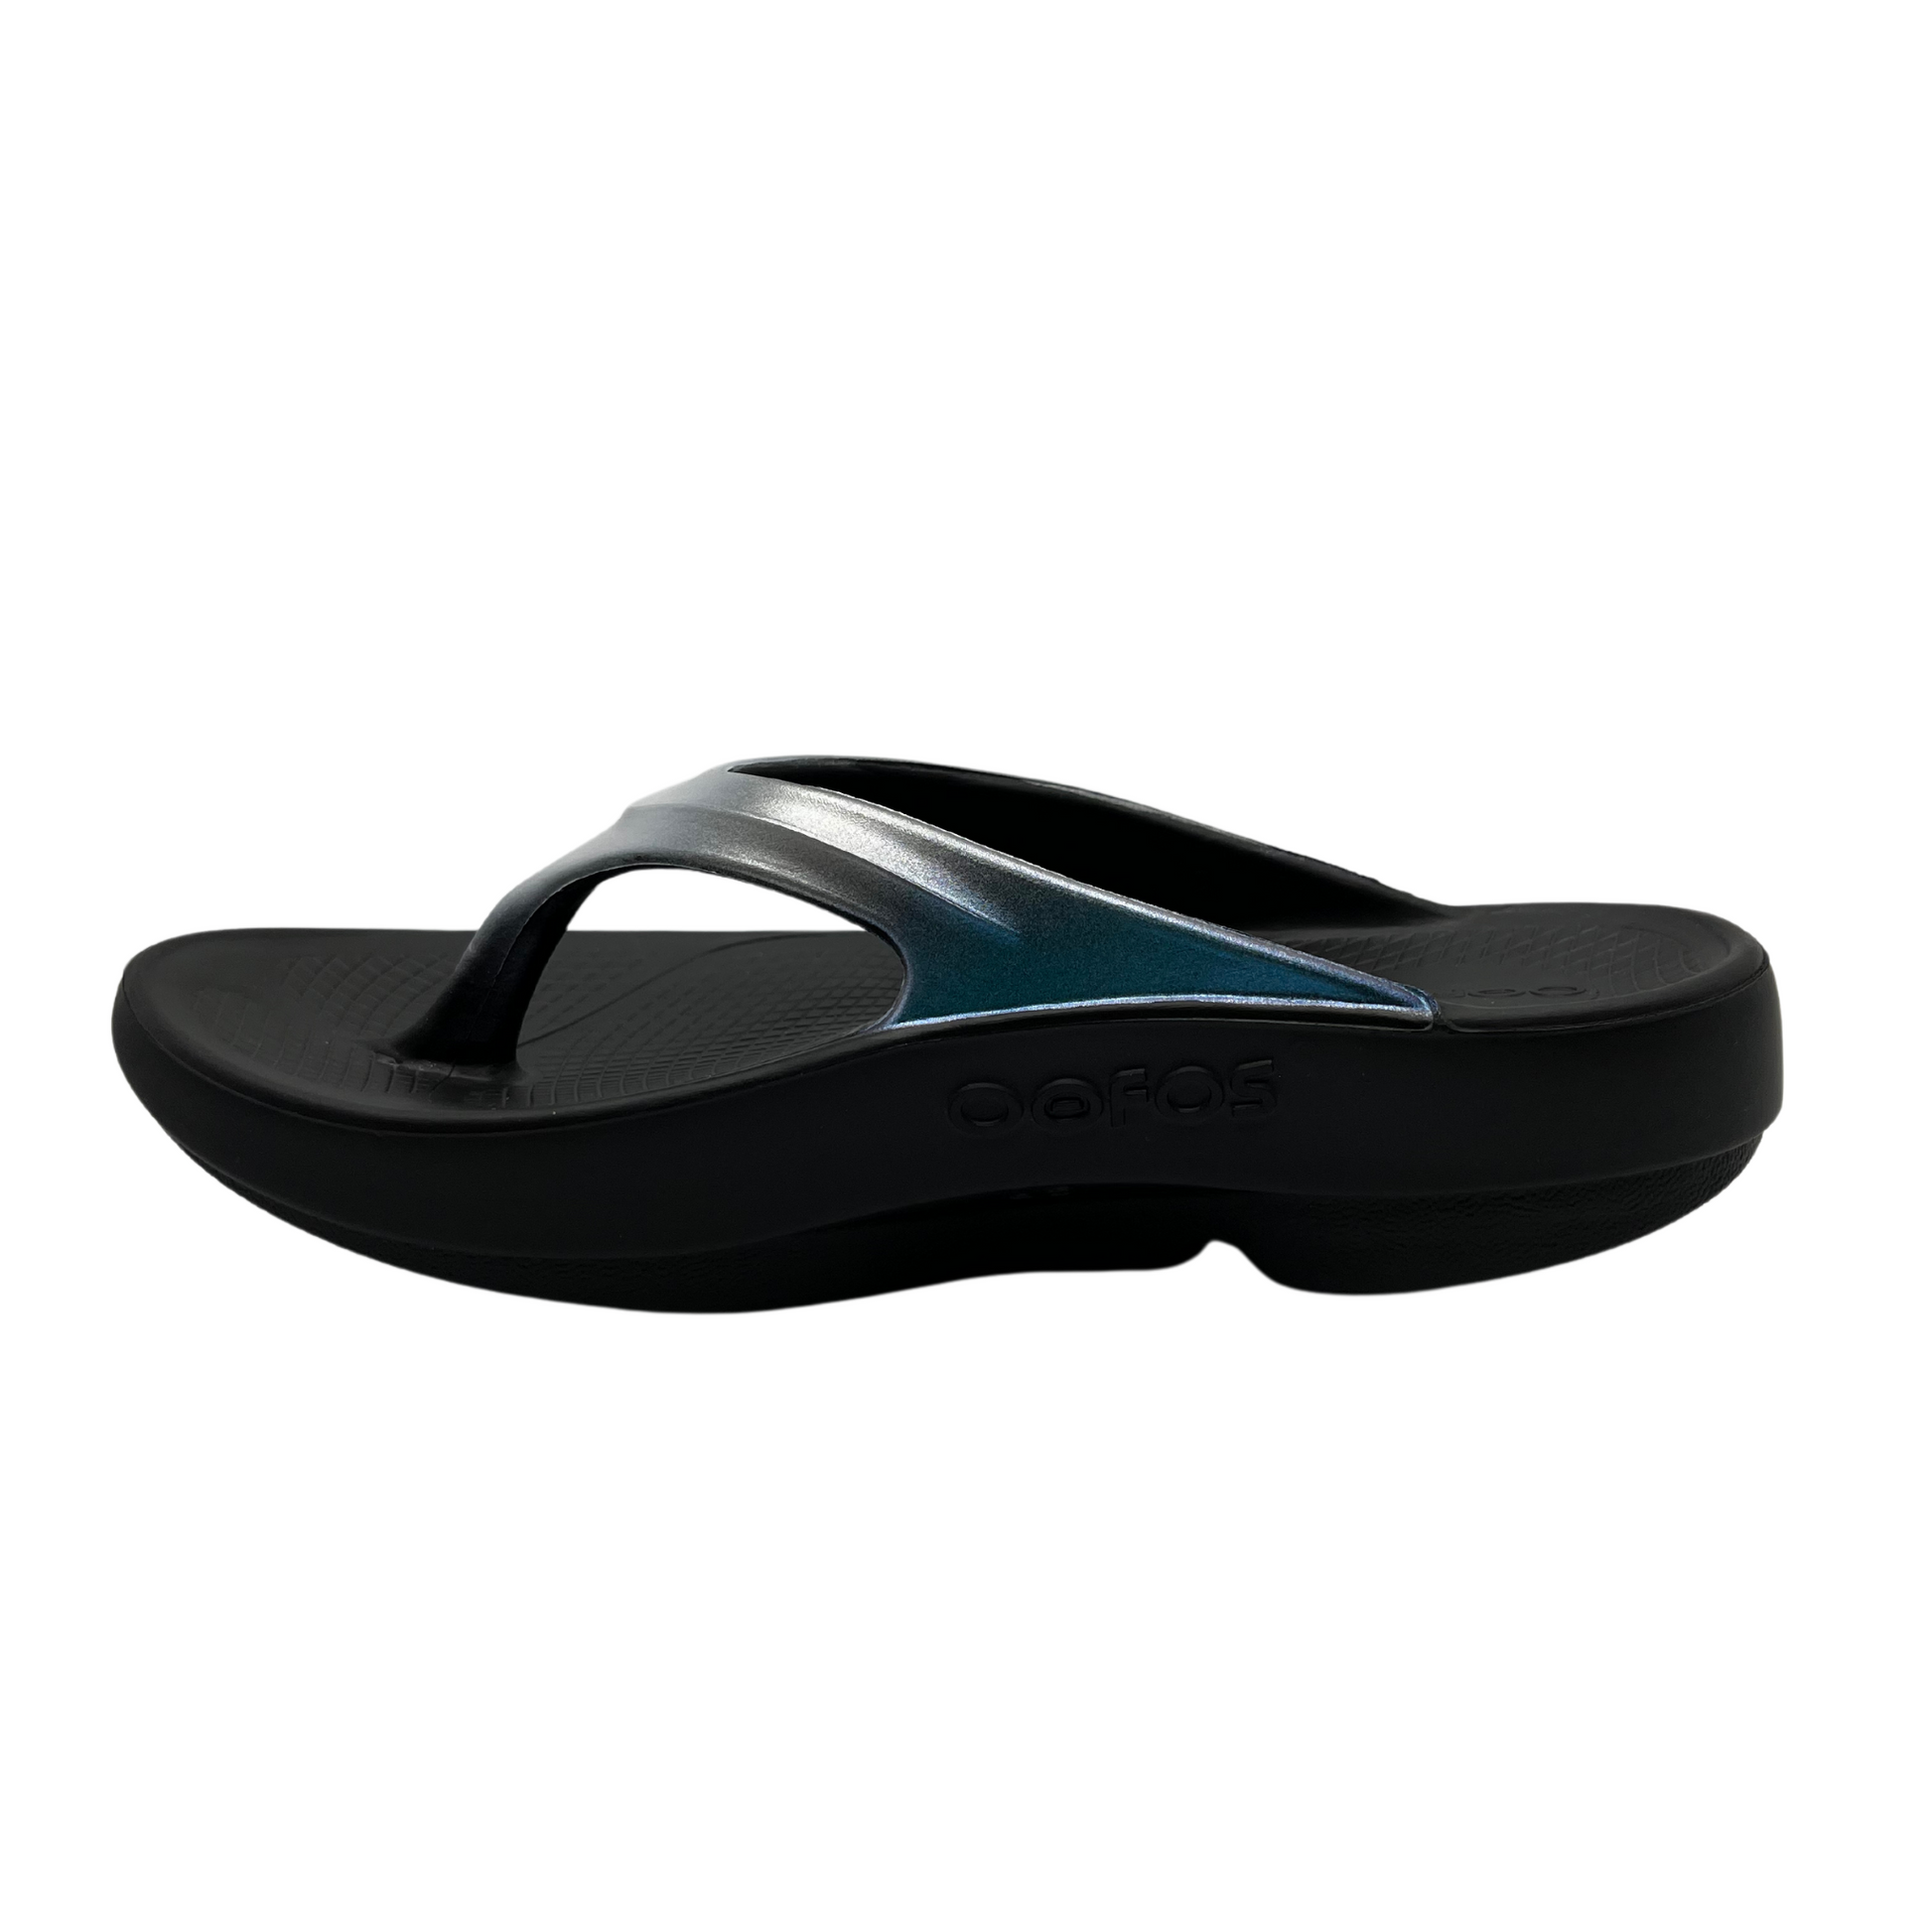 Left facing view of foam, thong strapped sandals with iridescent finish on straps